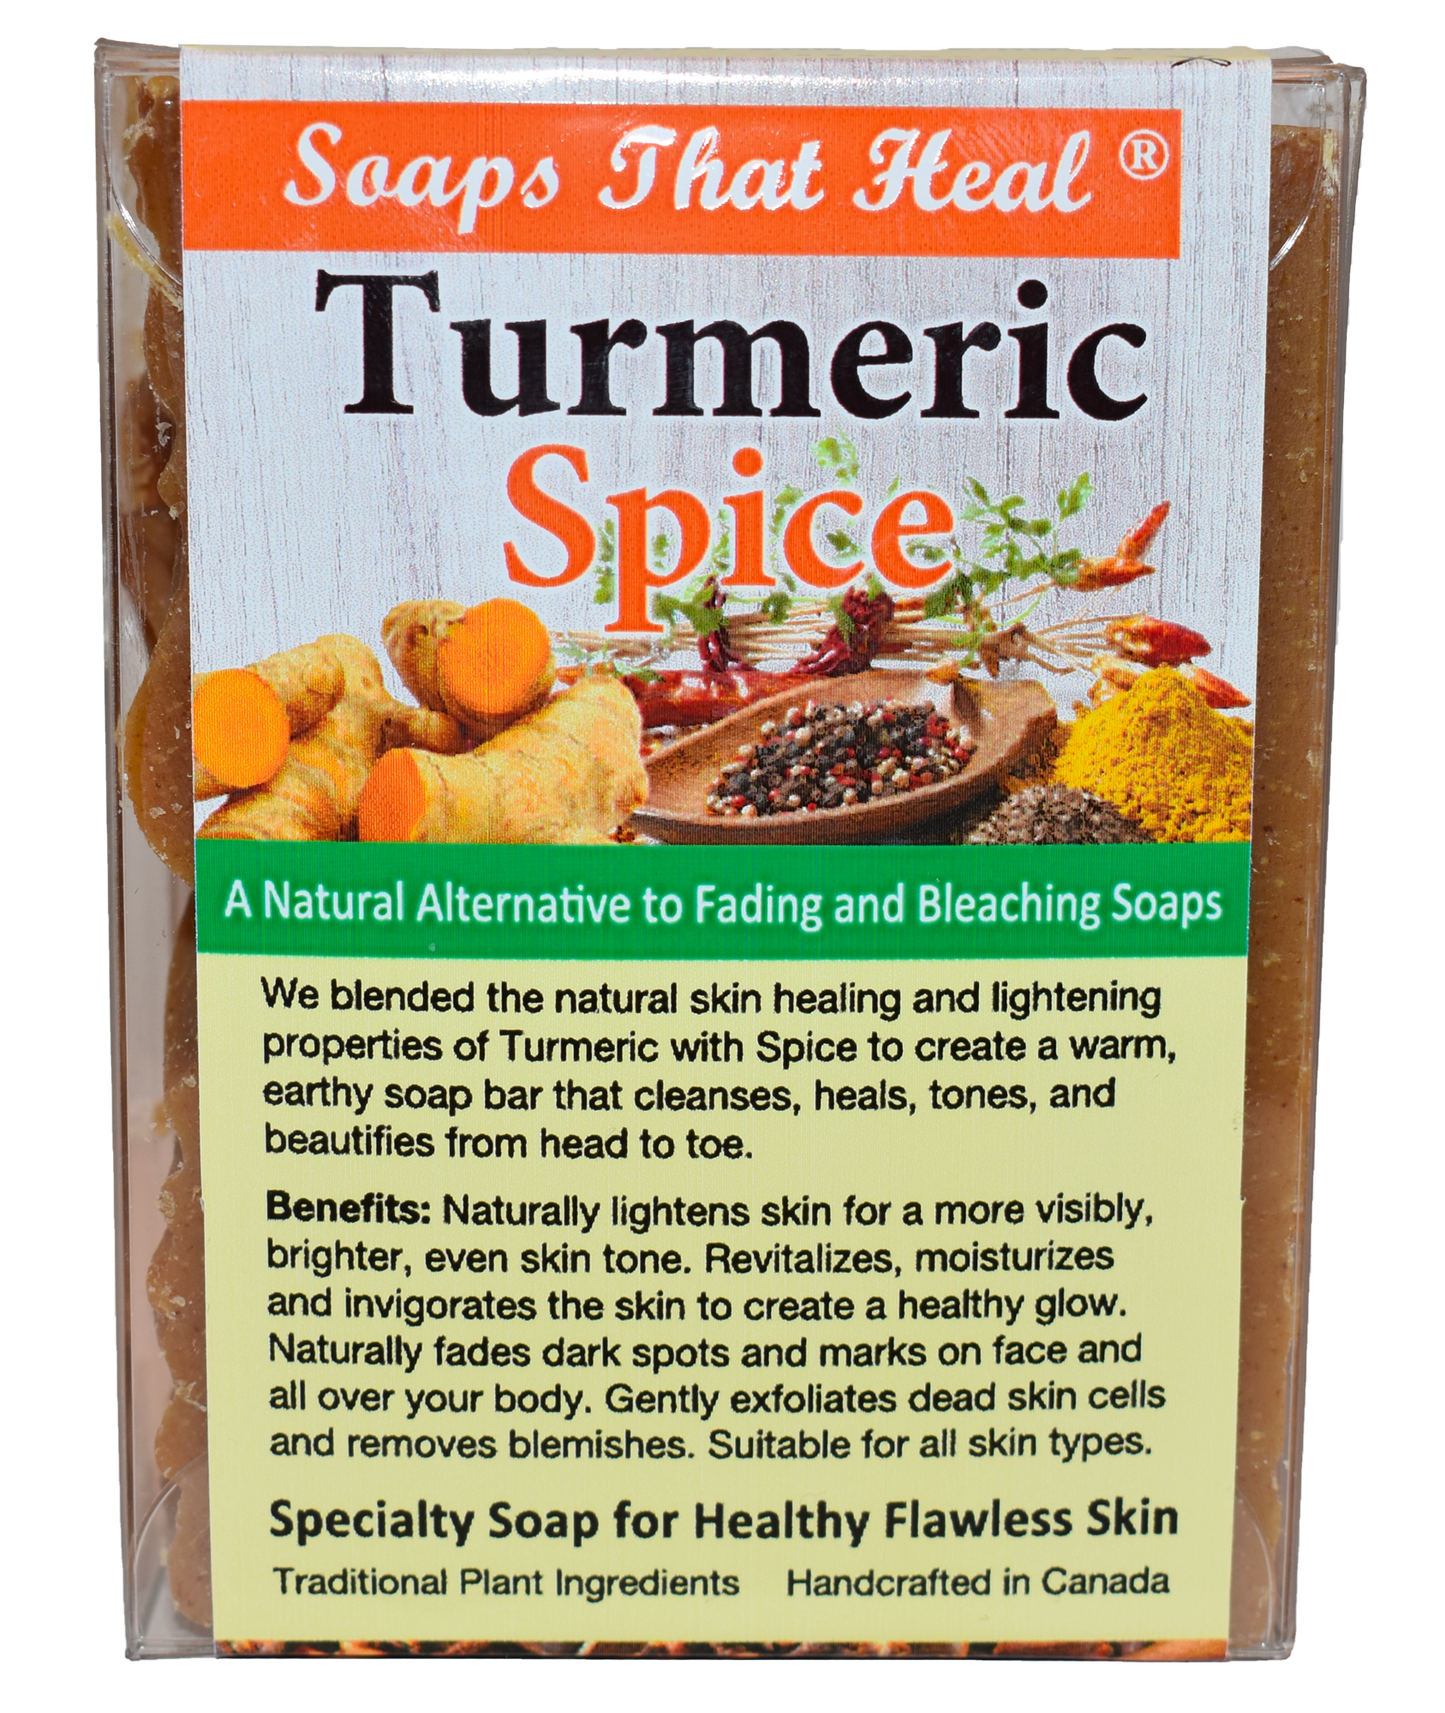 Soaps That Heal  Turmeric Spice Natural Lightening Bar for Severe Facial Hyperpigmentation and Problem Skin  A natural remedy for facial hyperpigmentation. Enriched with turmeric and spices, it works to diminish dark spots, revealing a more radiant and evenly-toned complexion